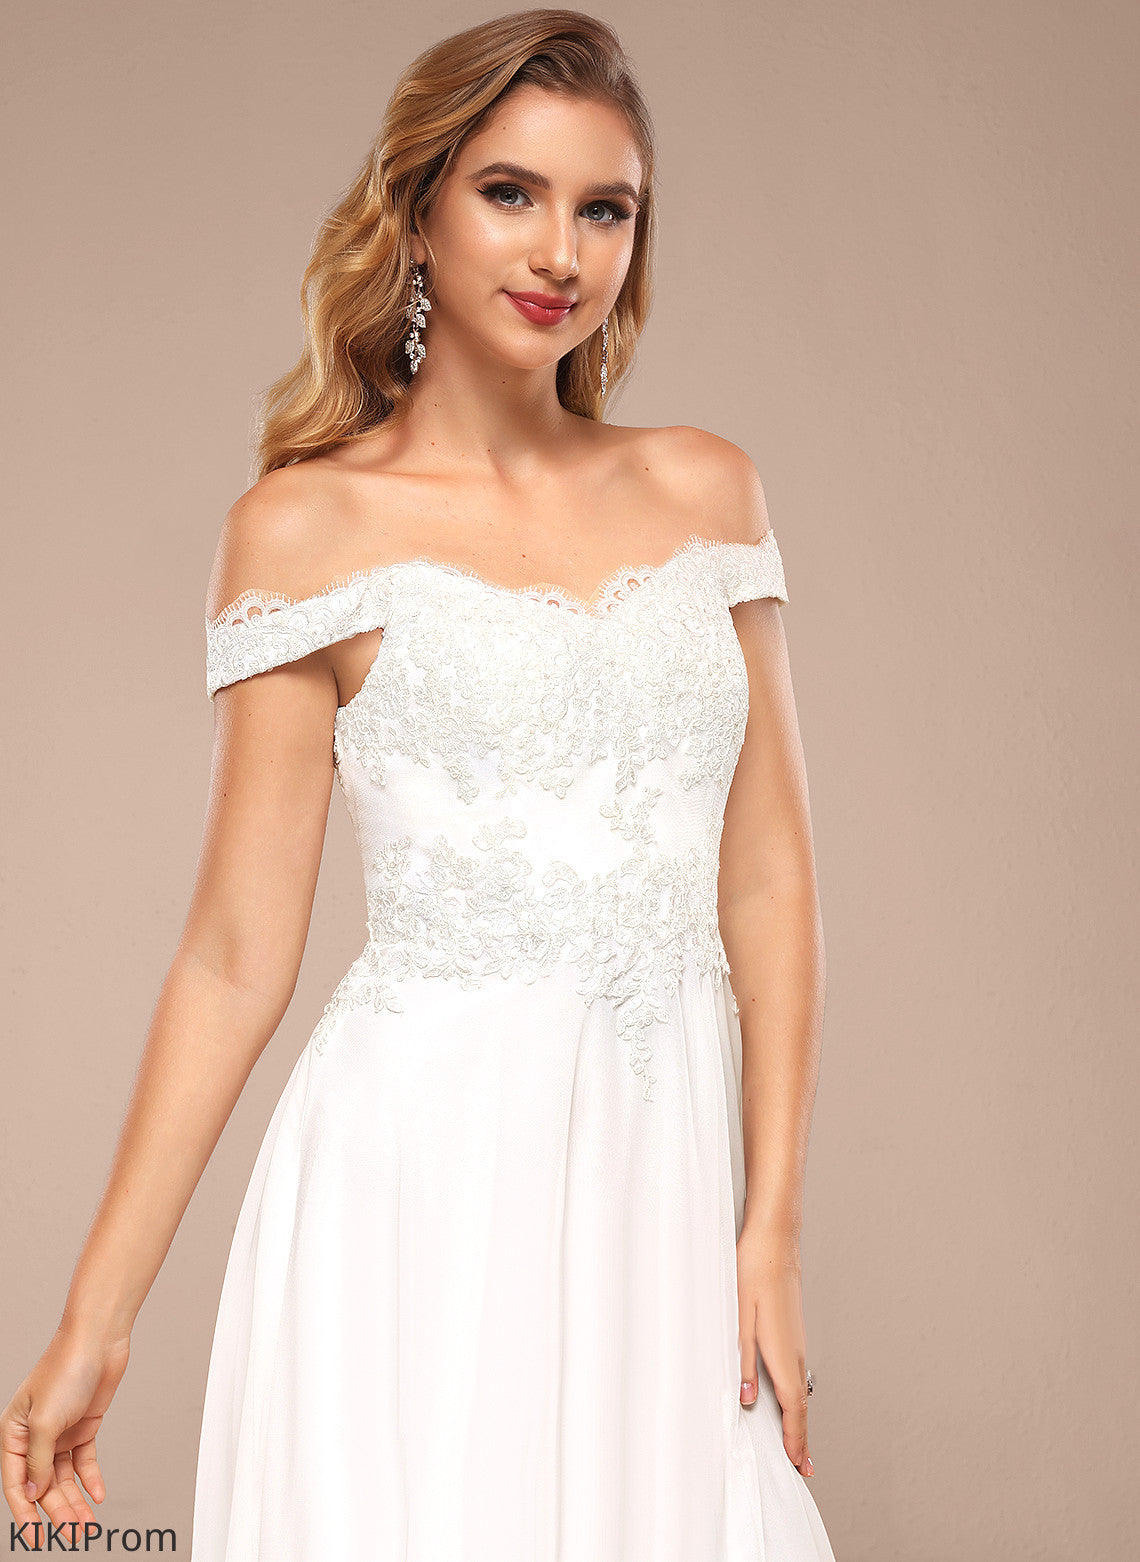 With Chiffon Lace A-Line Janiyah Sequins Floor-Length Off-the-Shoulder Wedding Dresses Wedding Dress